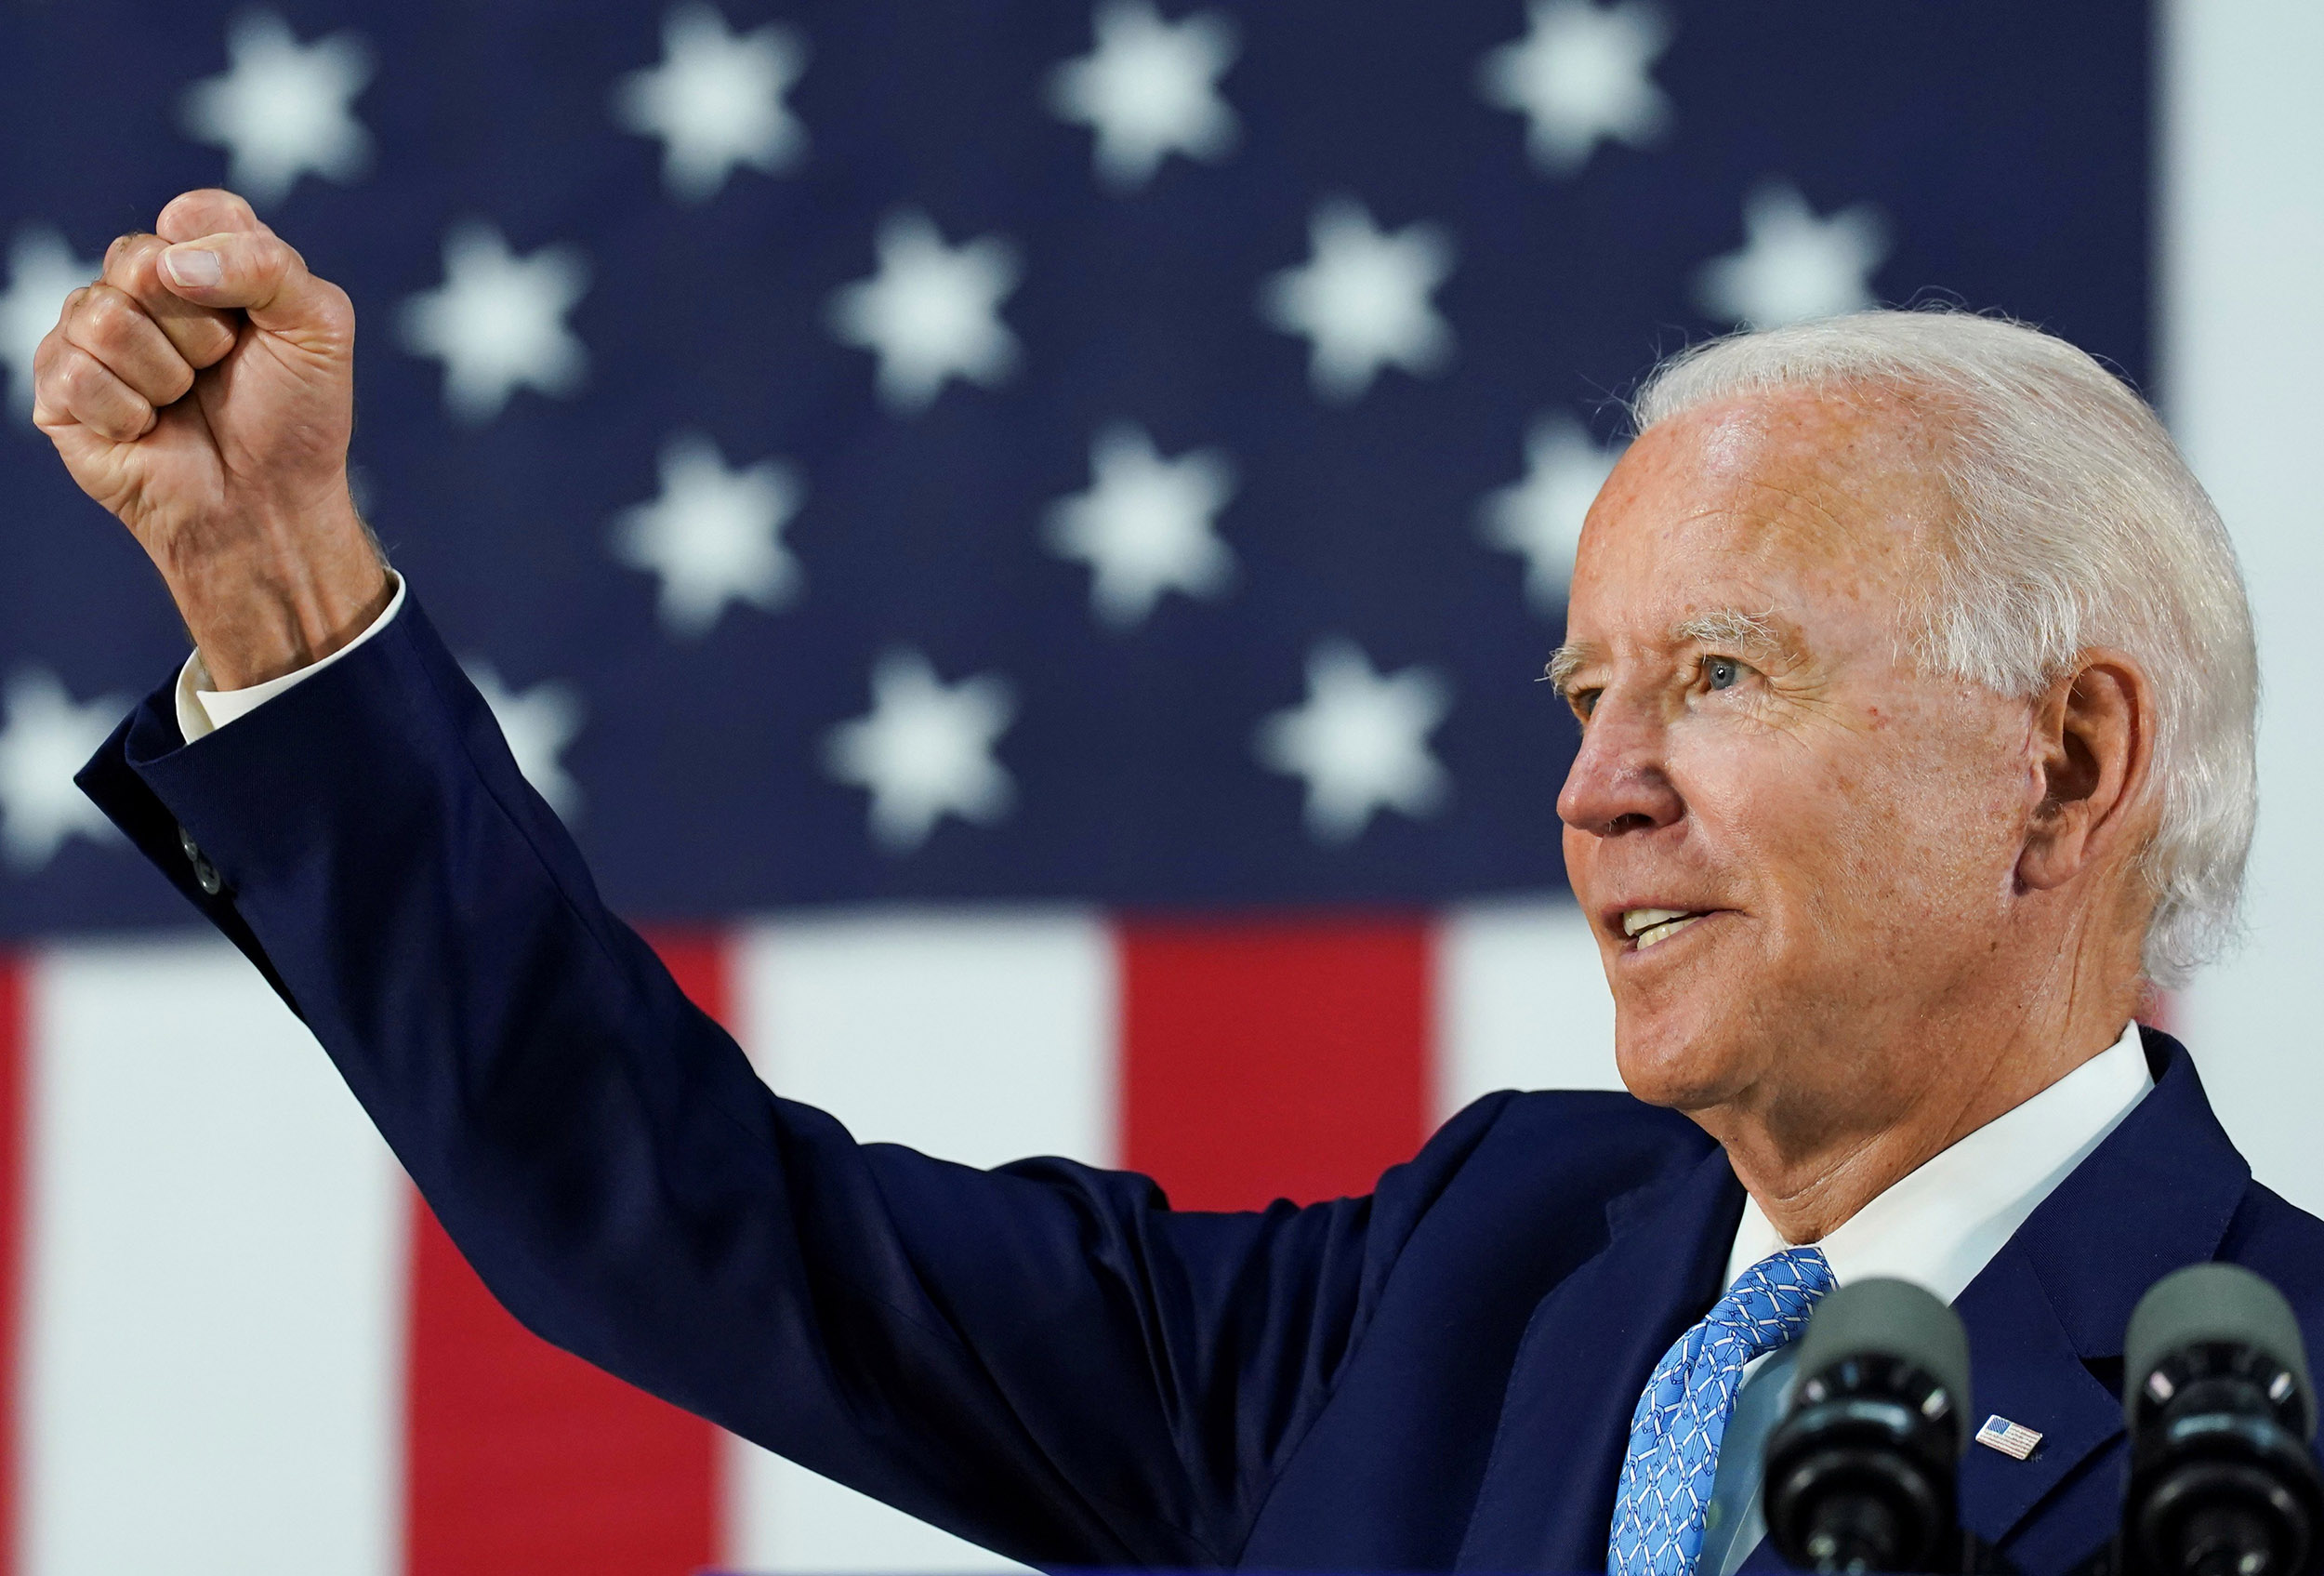 COVID-19 victims: Biden to hold candlelight ceremony on Monday